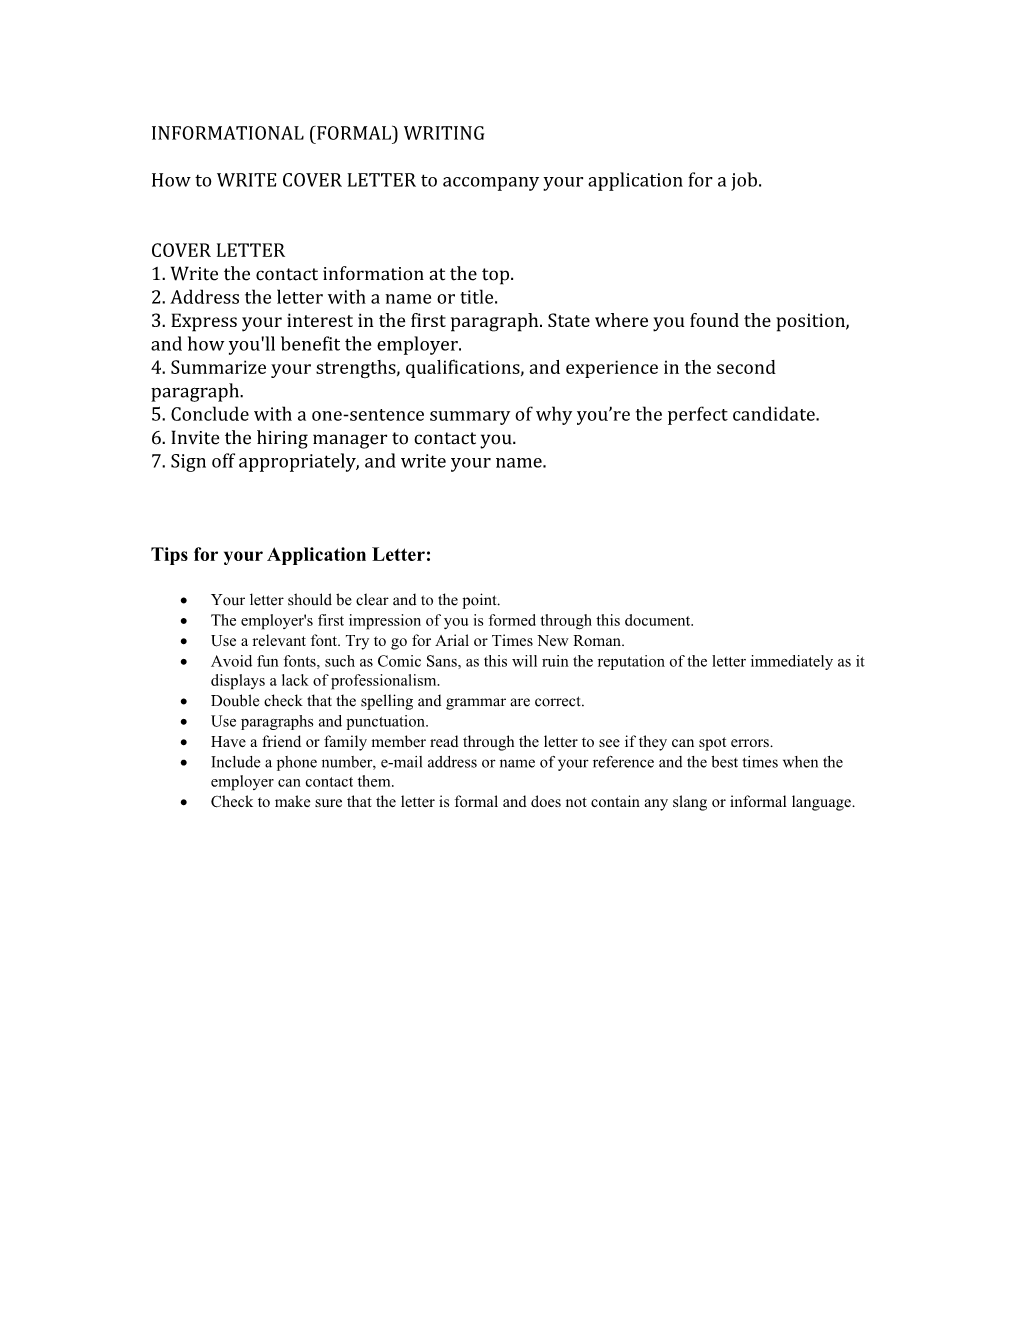 How to WRITE COVER LETTER to Accompany Your Application for a Job